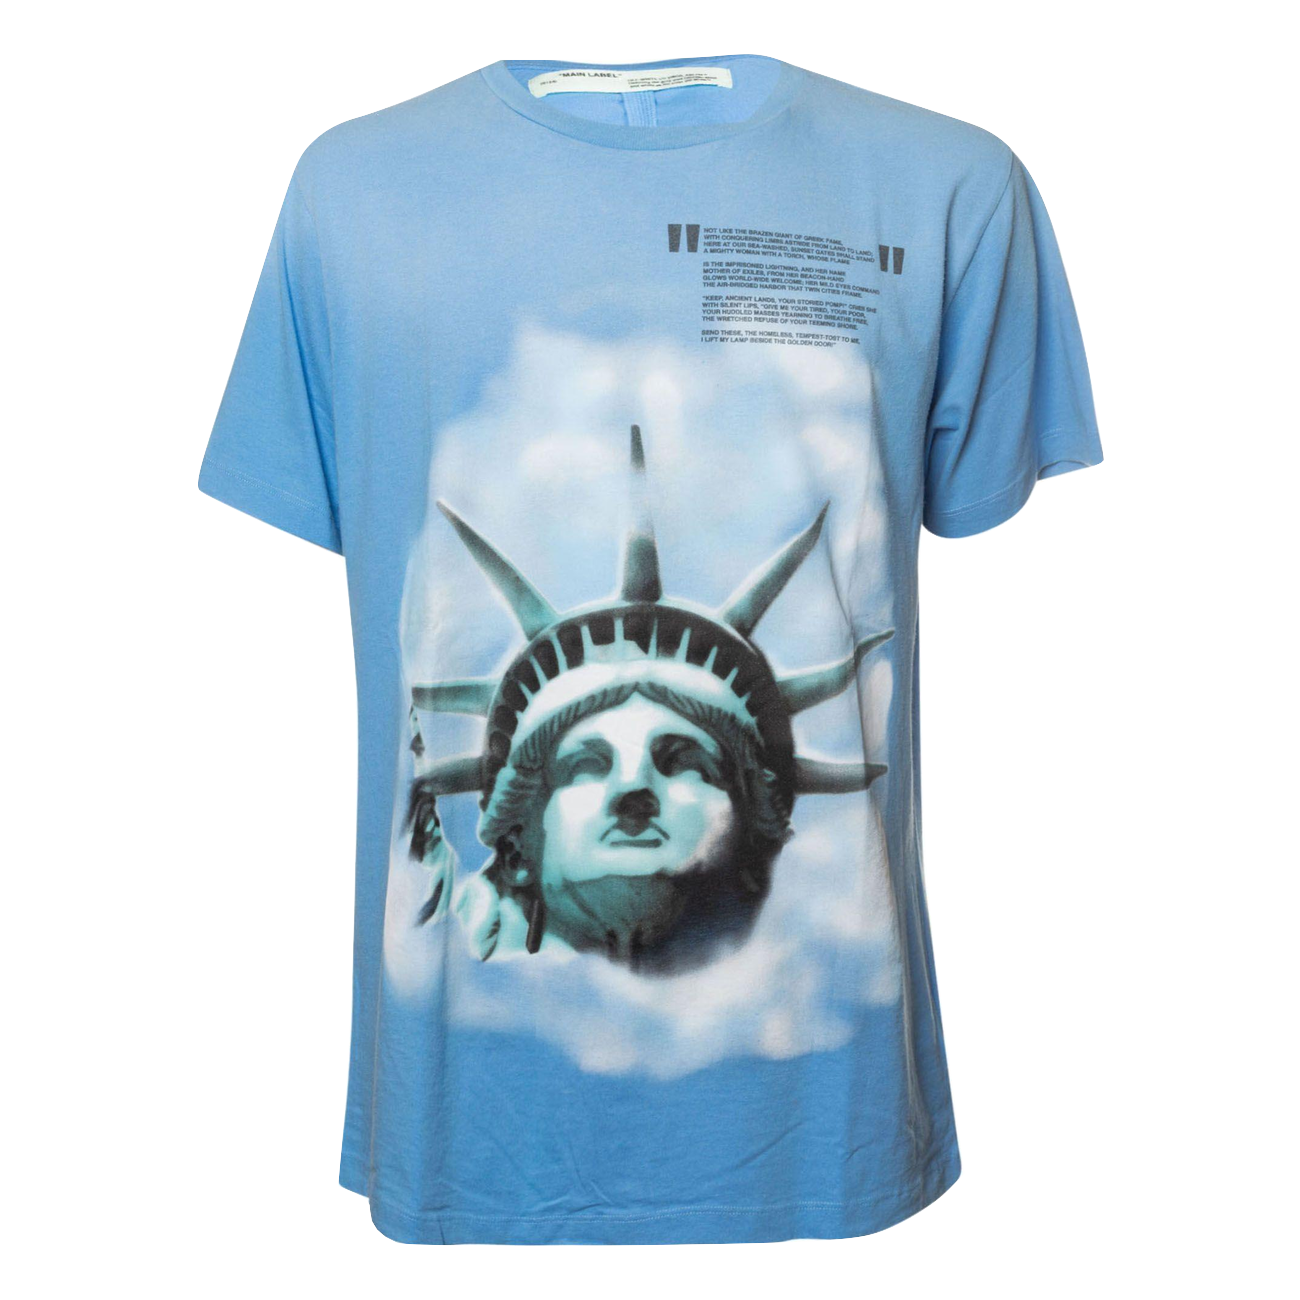 Off-White Statue Of Liberty Print T-Shirt in Light Blue